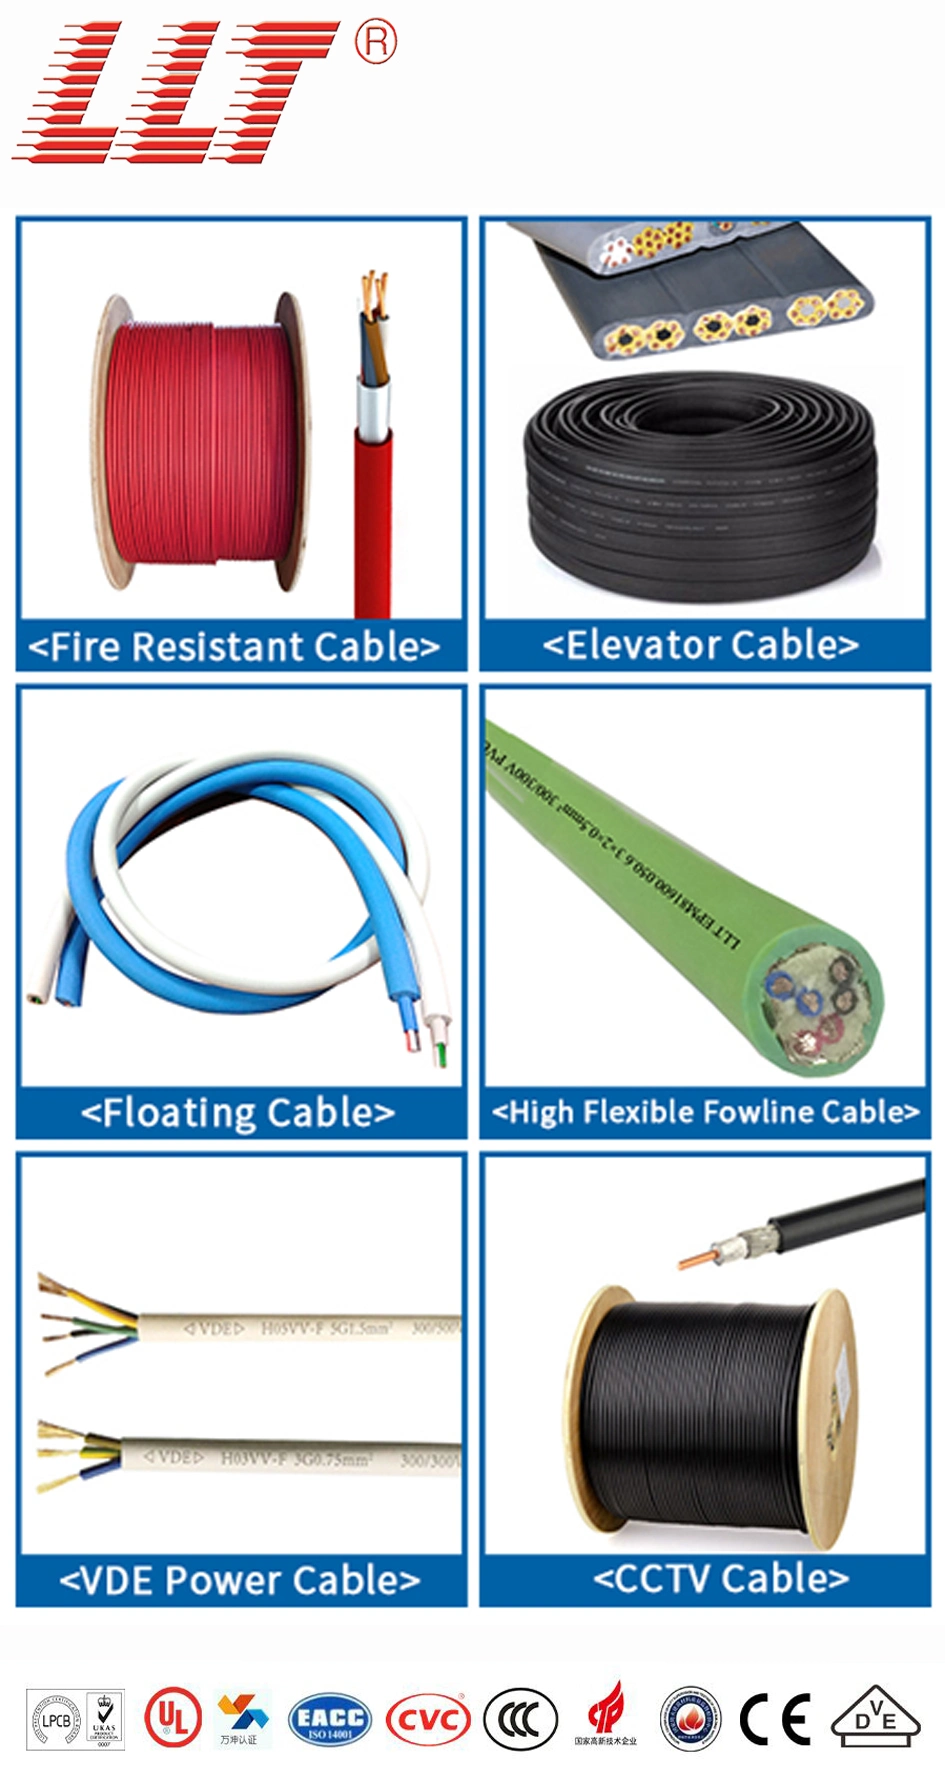 UL Listed Electric Wire Copper Wire Cable Silicone/ Rubber Jacket Fire Alarm Cable for Fire Alarm System Security Alarm System Sprinkler System Lighting